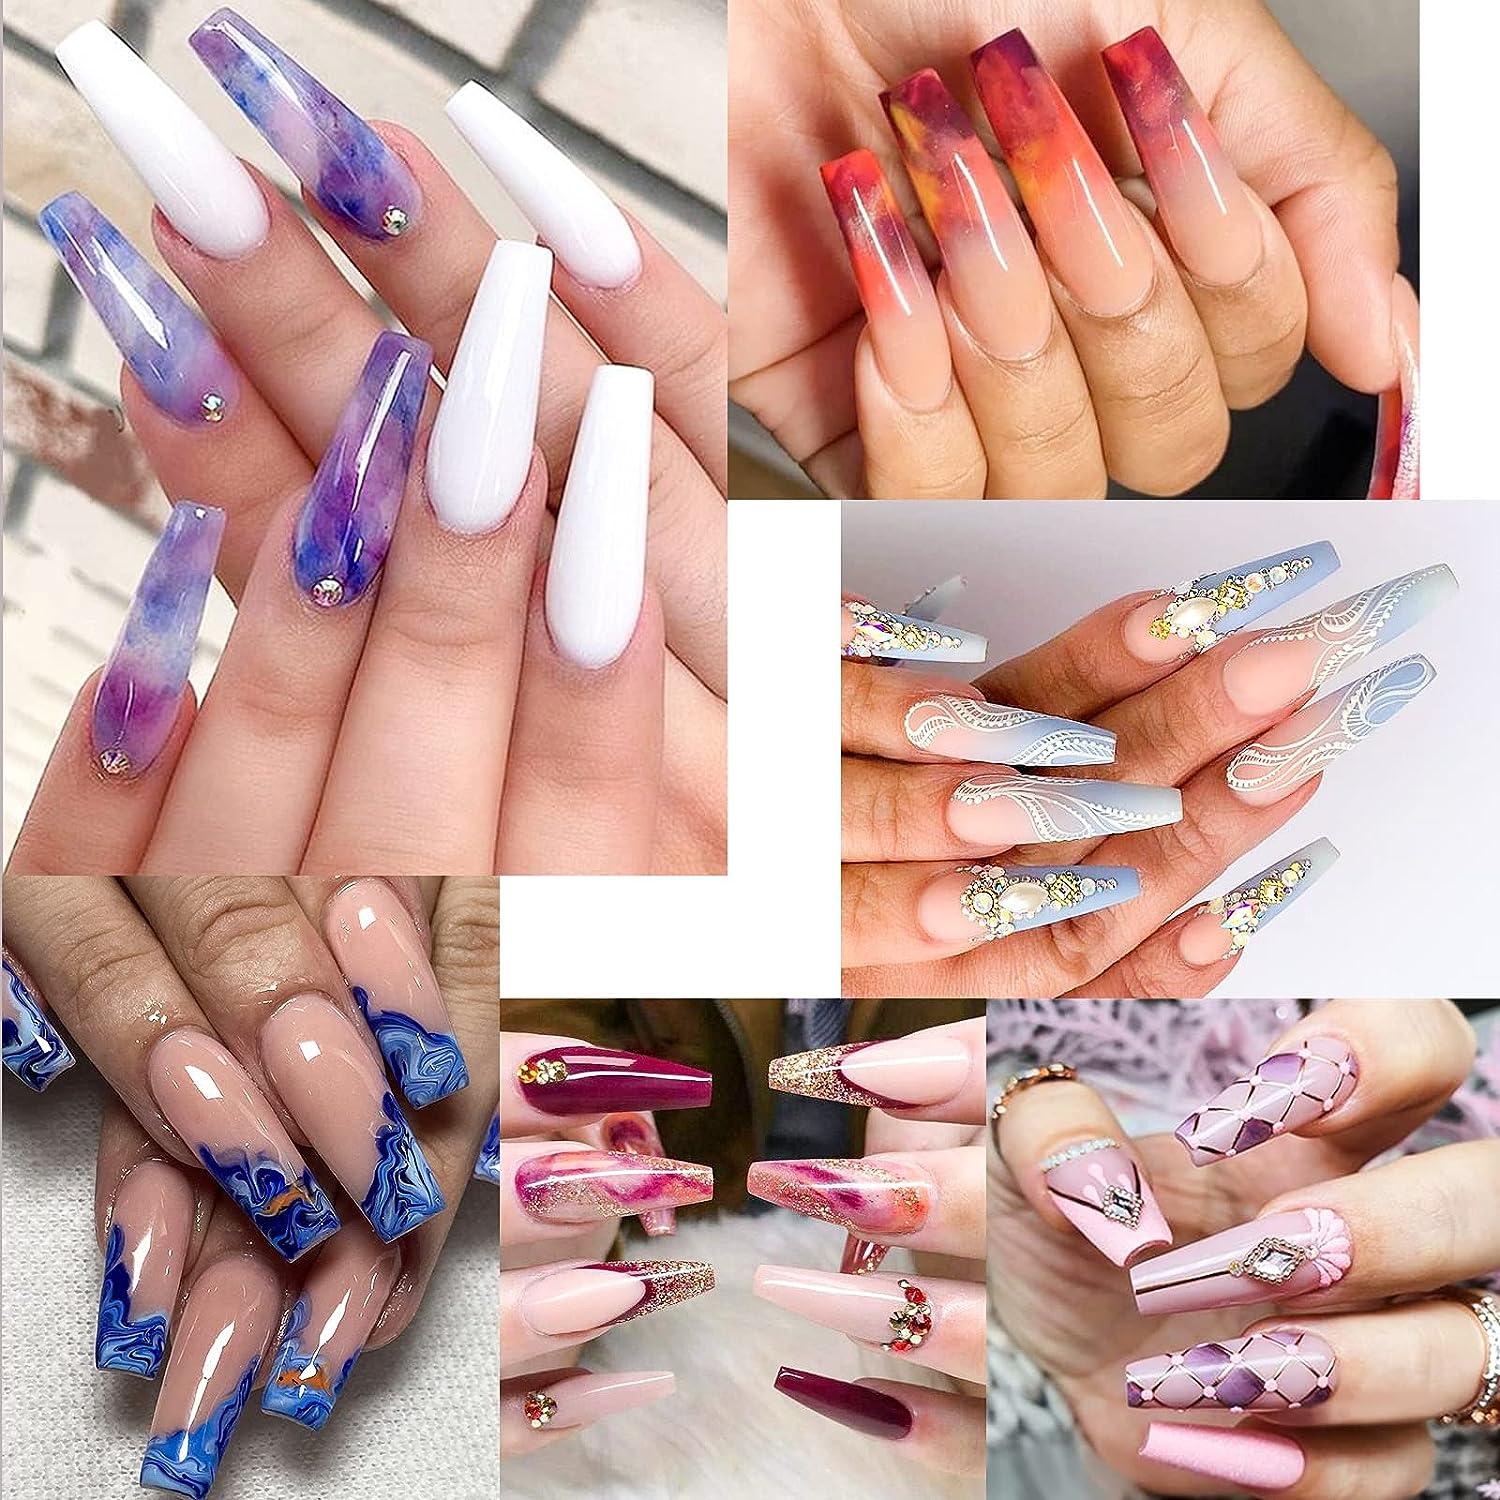 Clear Acrylic Full Cover False Nail Artificial Nails with Case for Nail  Salons and DIY Nail Art